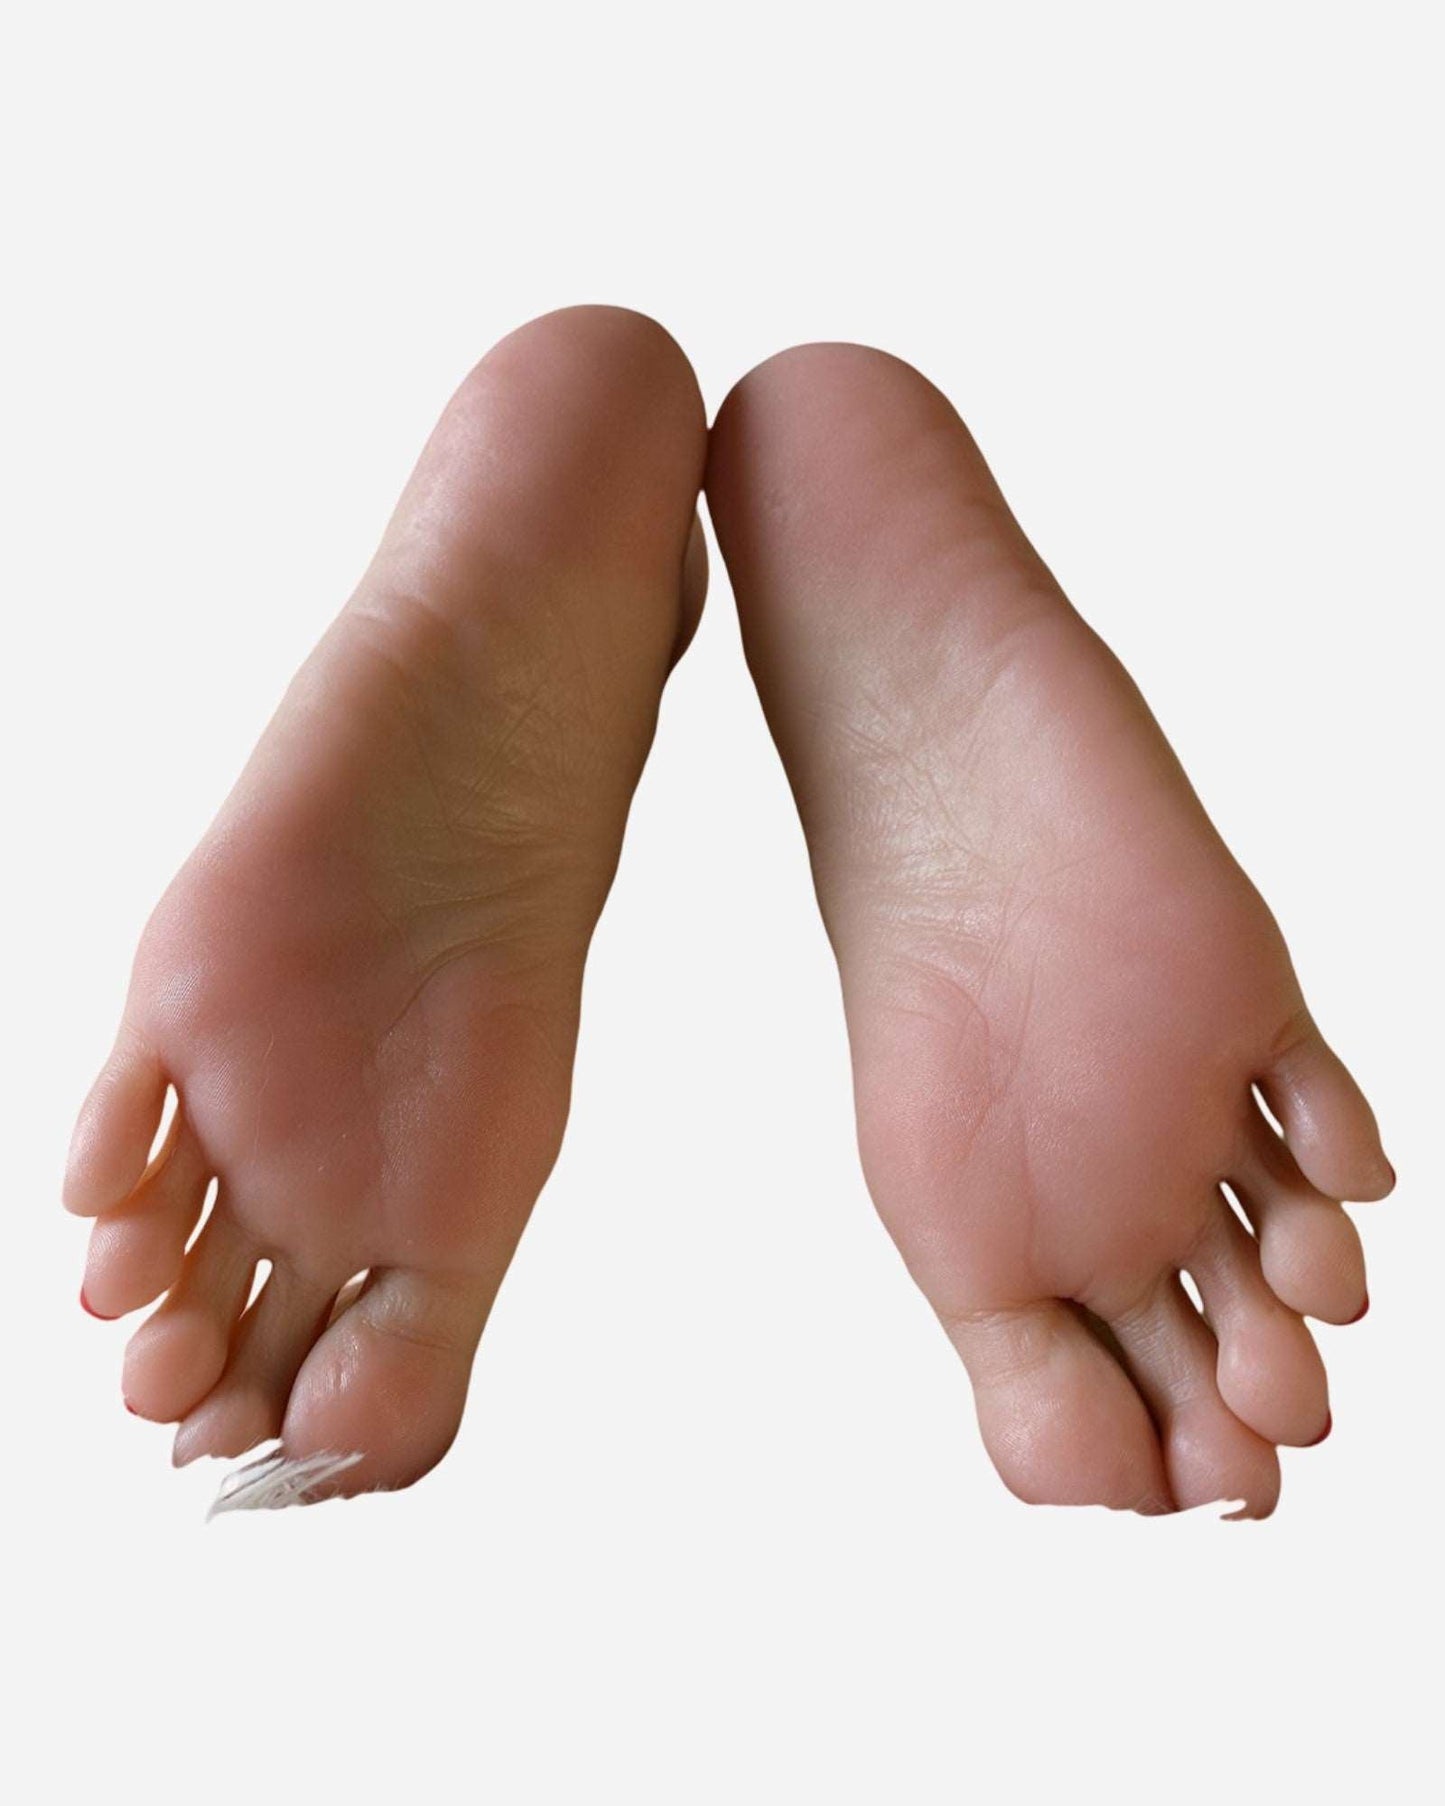 0 Super Realistic Girl Feet with Red Nails